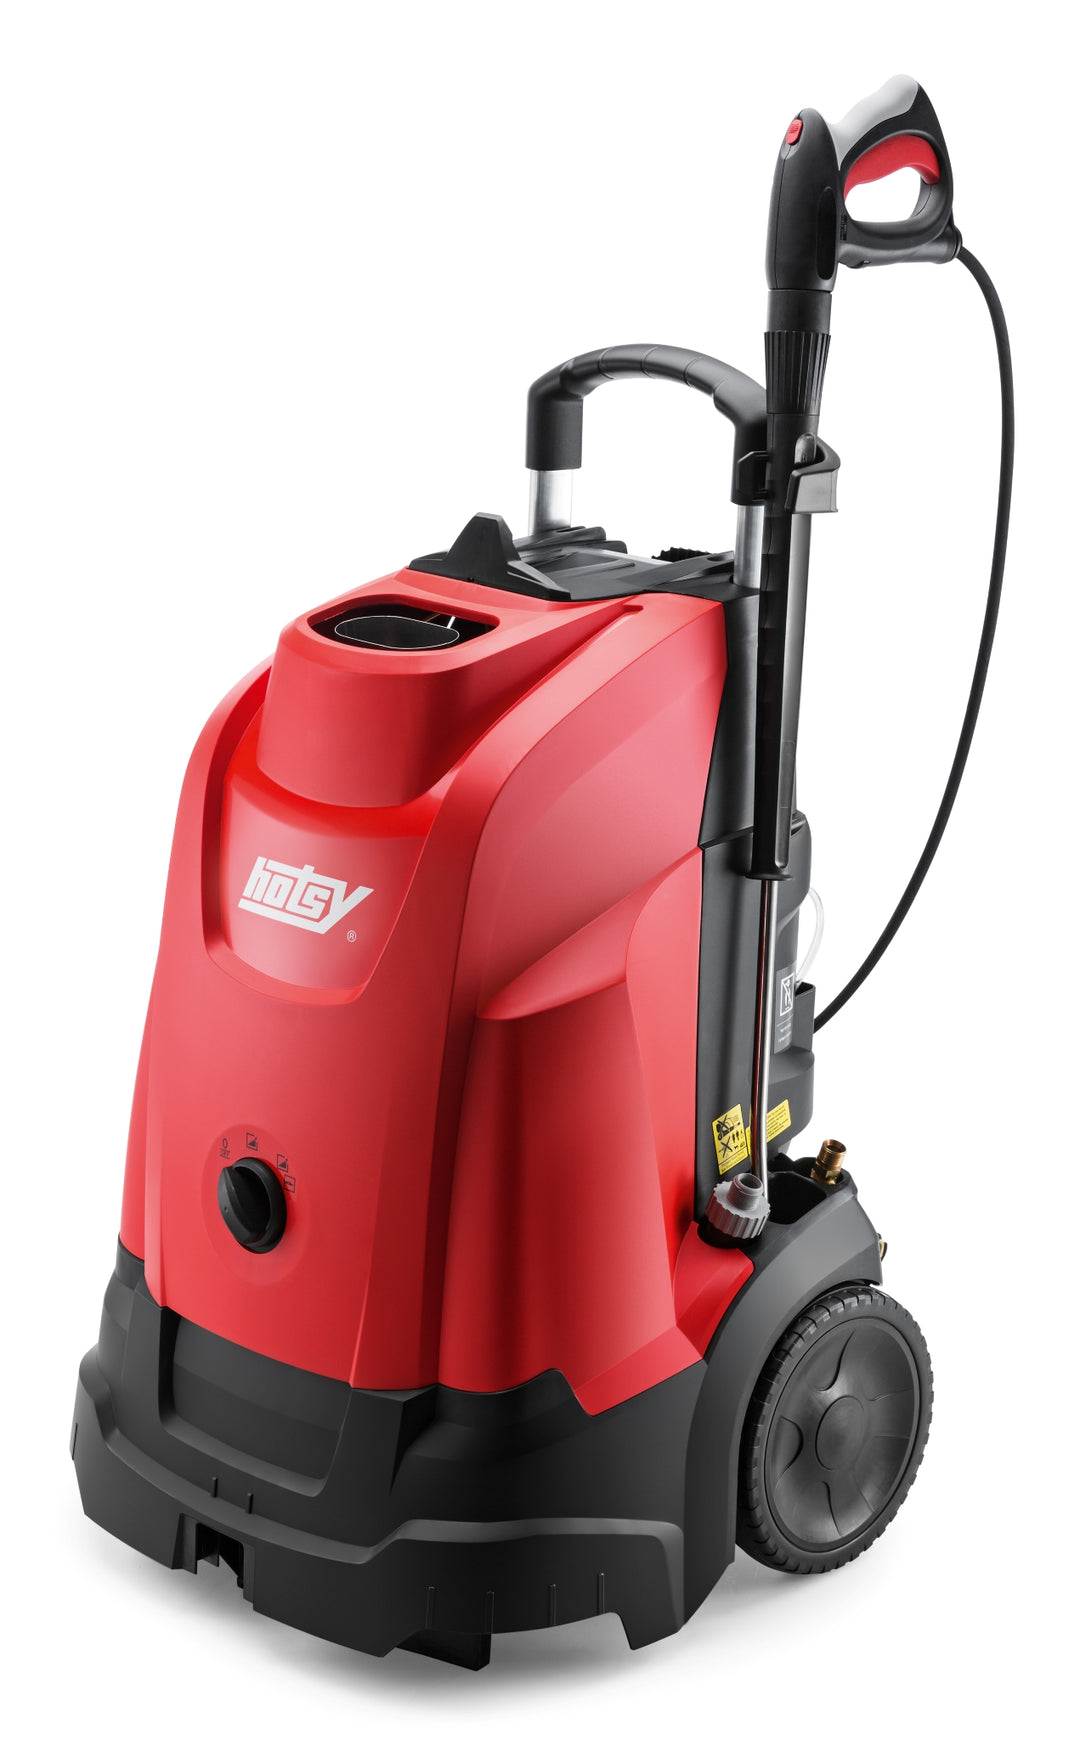 Hotsy® Model 333 - Hot Water Pressure Washer - Electric Motor - Oil Fired Burner - Direct Drive - Portable